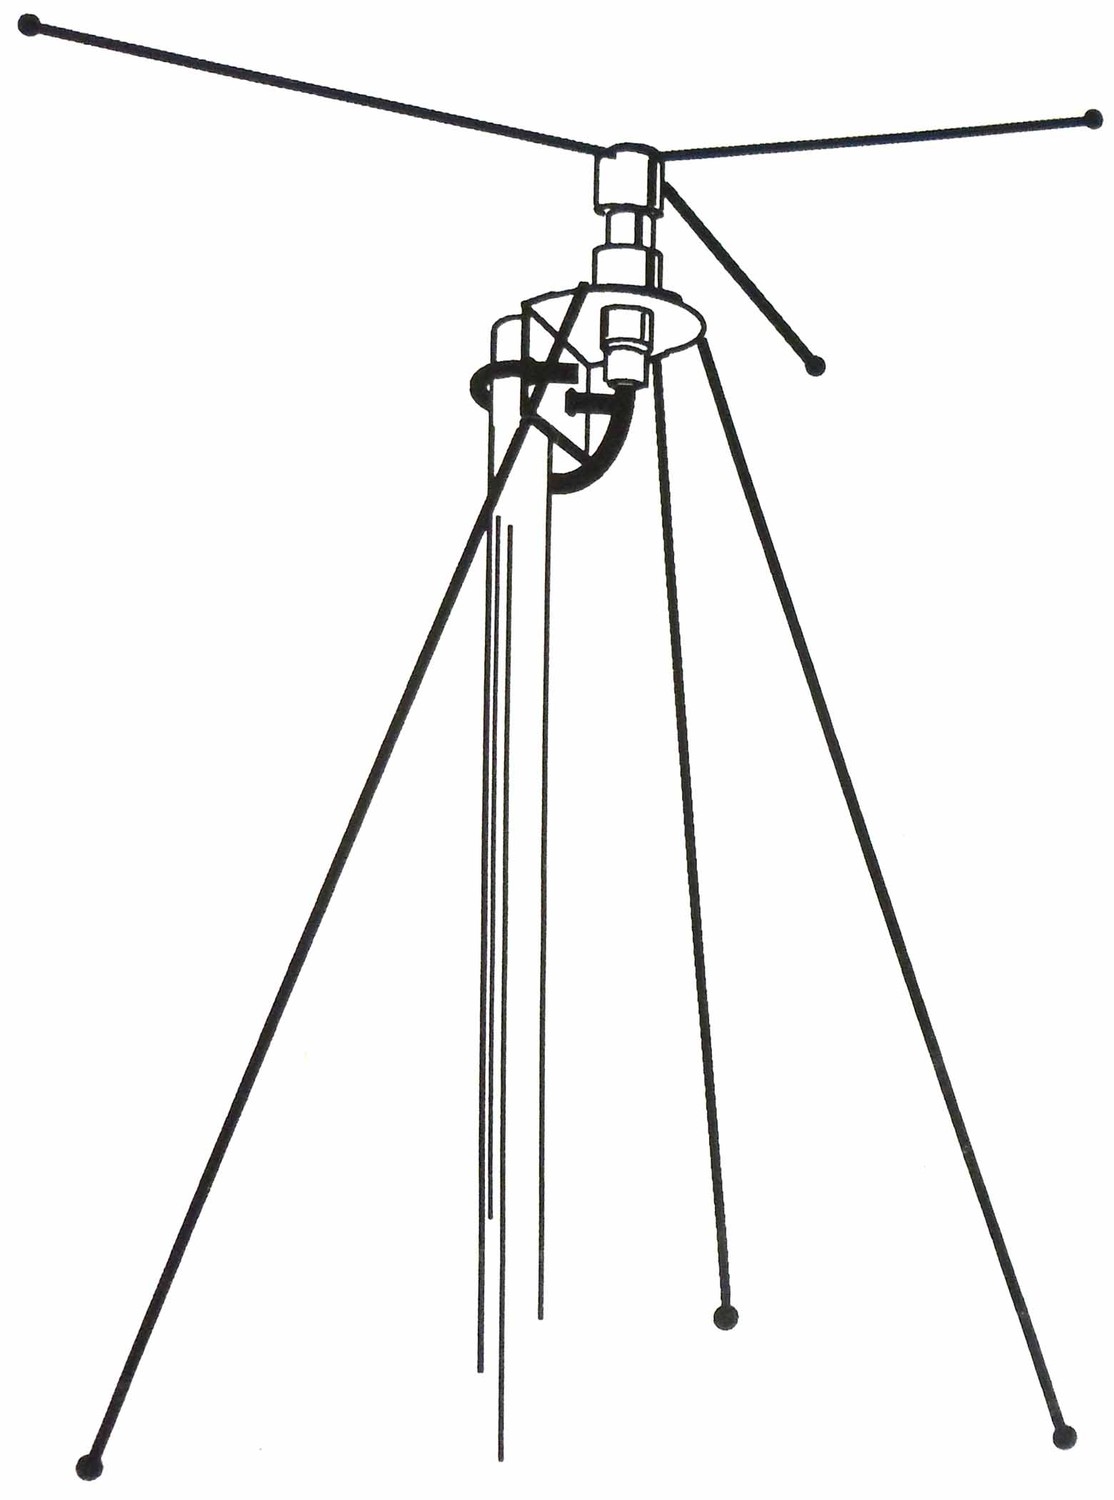 Discone Base Scanner Antenna With 50' Coax & Bnc